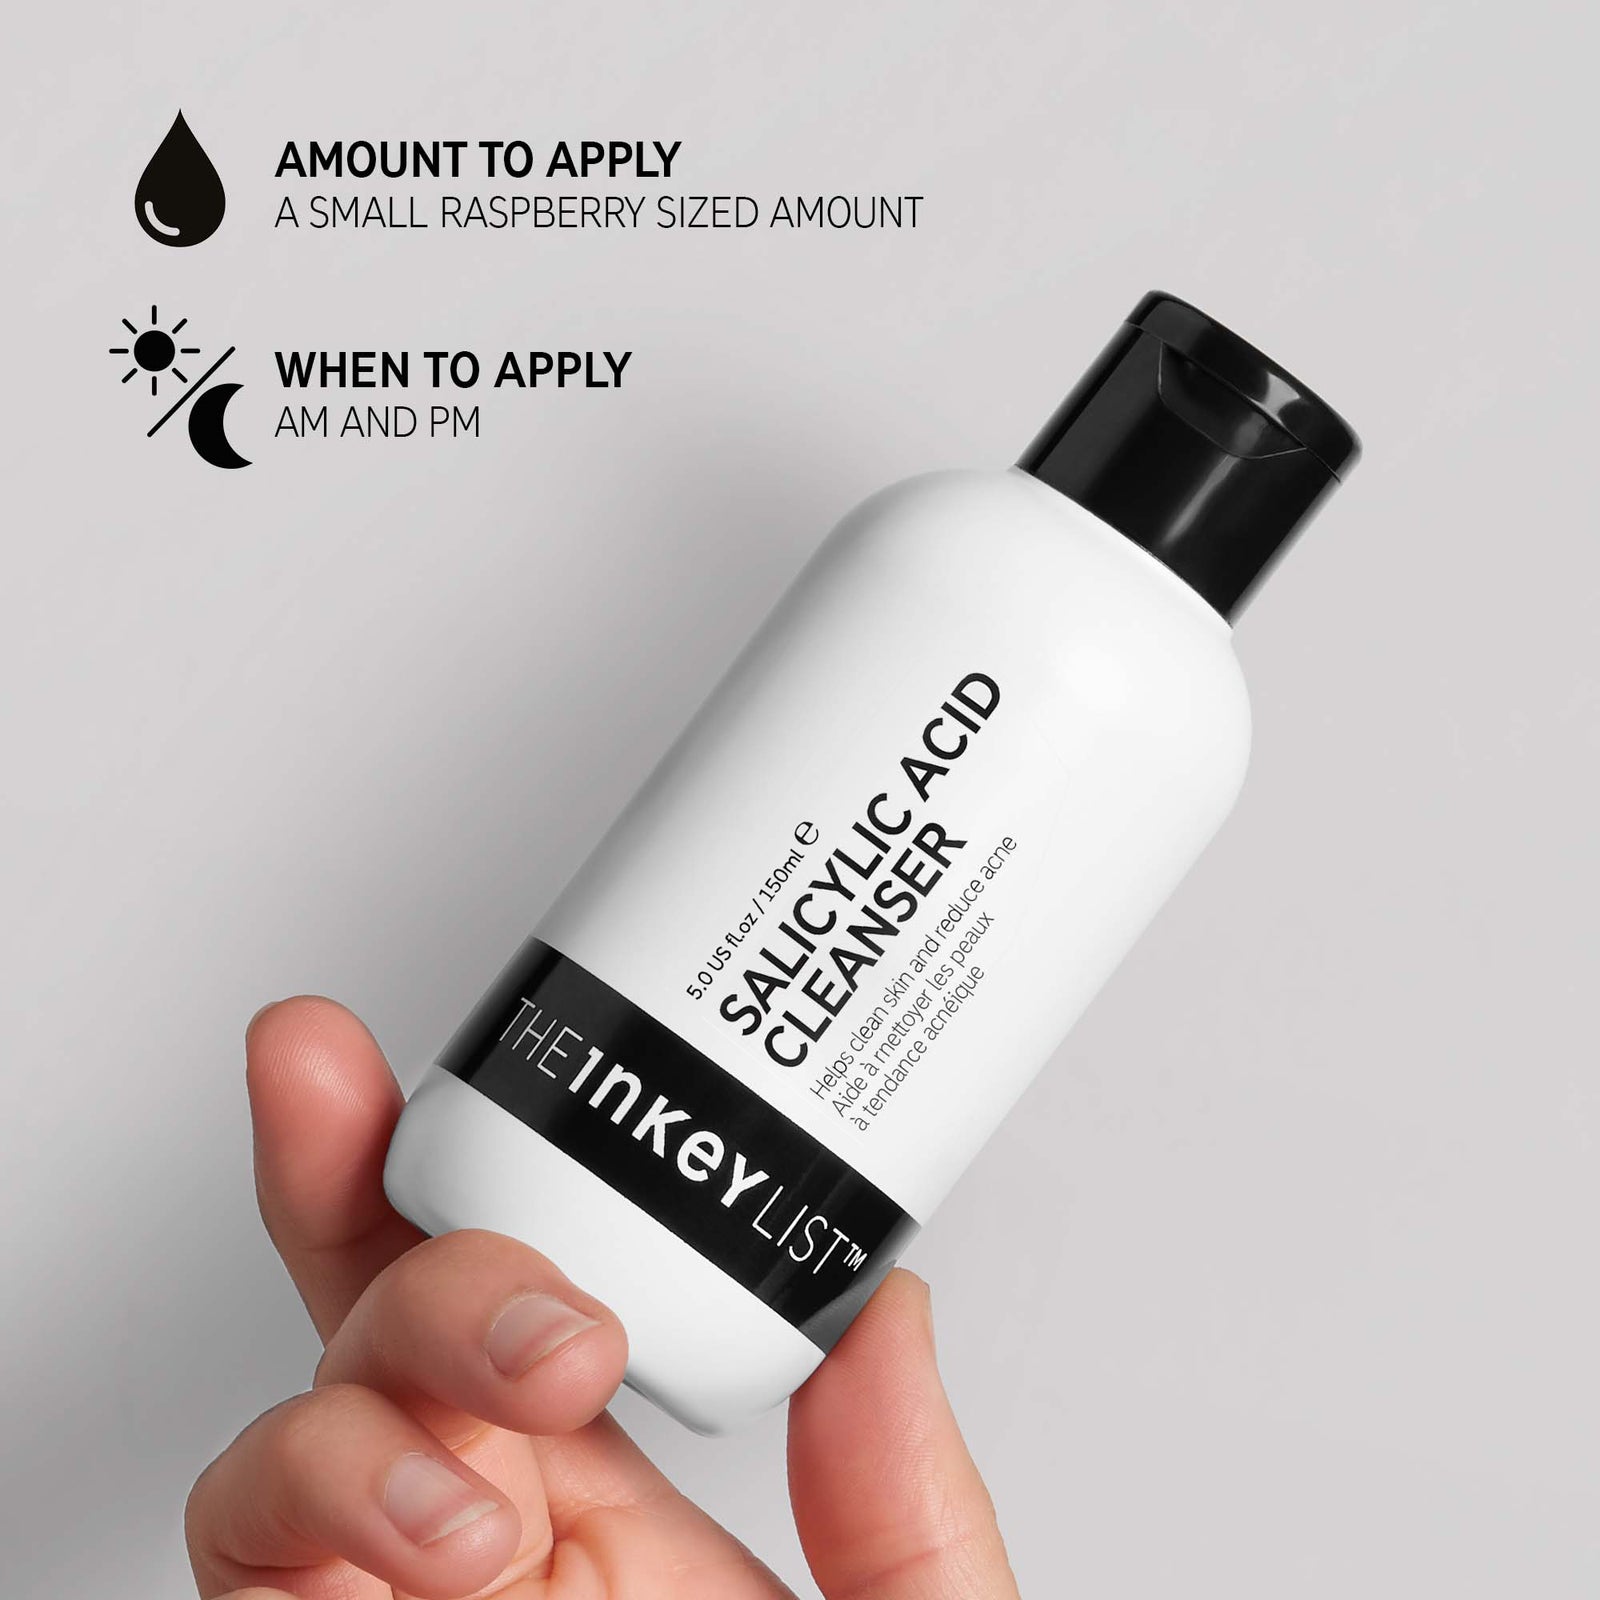 Hand holding Salicylic Acid Cleanser bottle with black text explaining how and when to use it. The text reads 'Amount to apply (small raspberry sized amount)' and 'When to apply (AM and PM)'